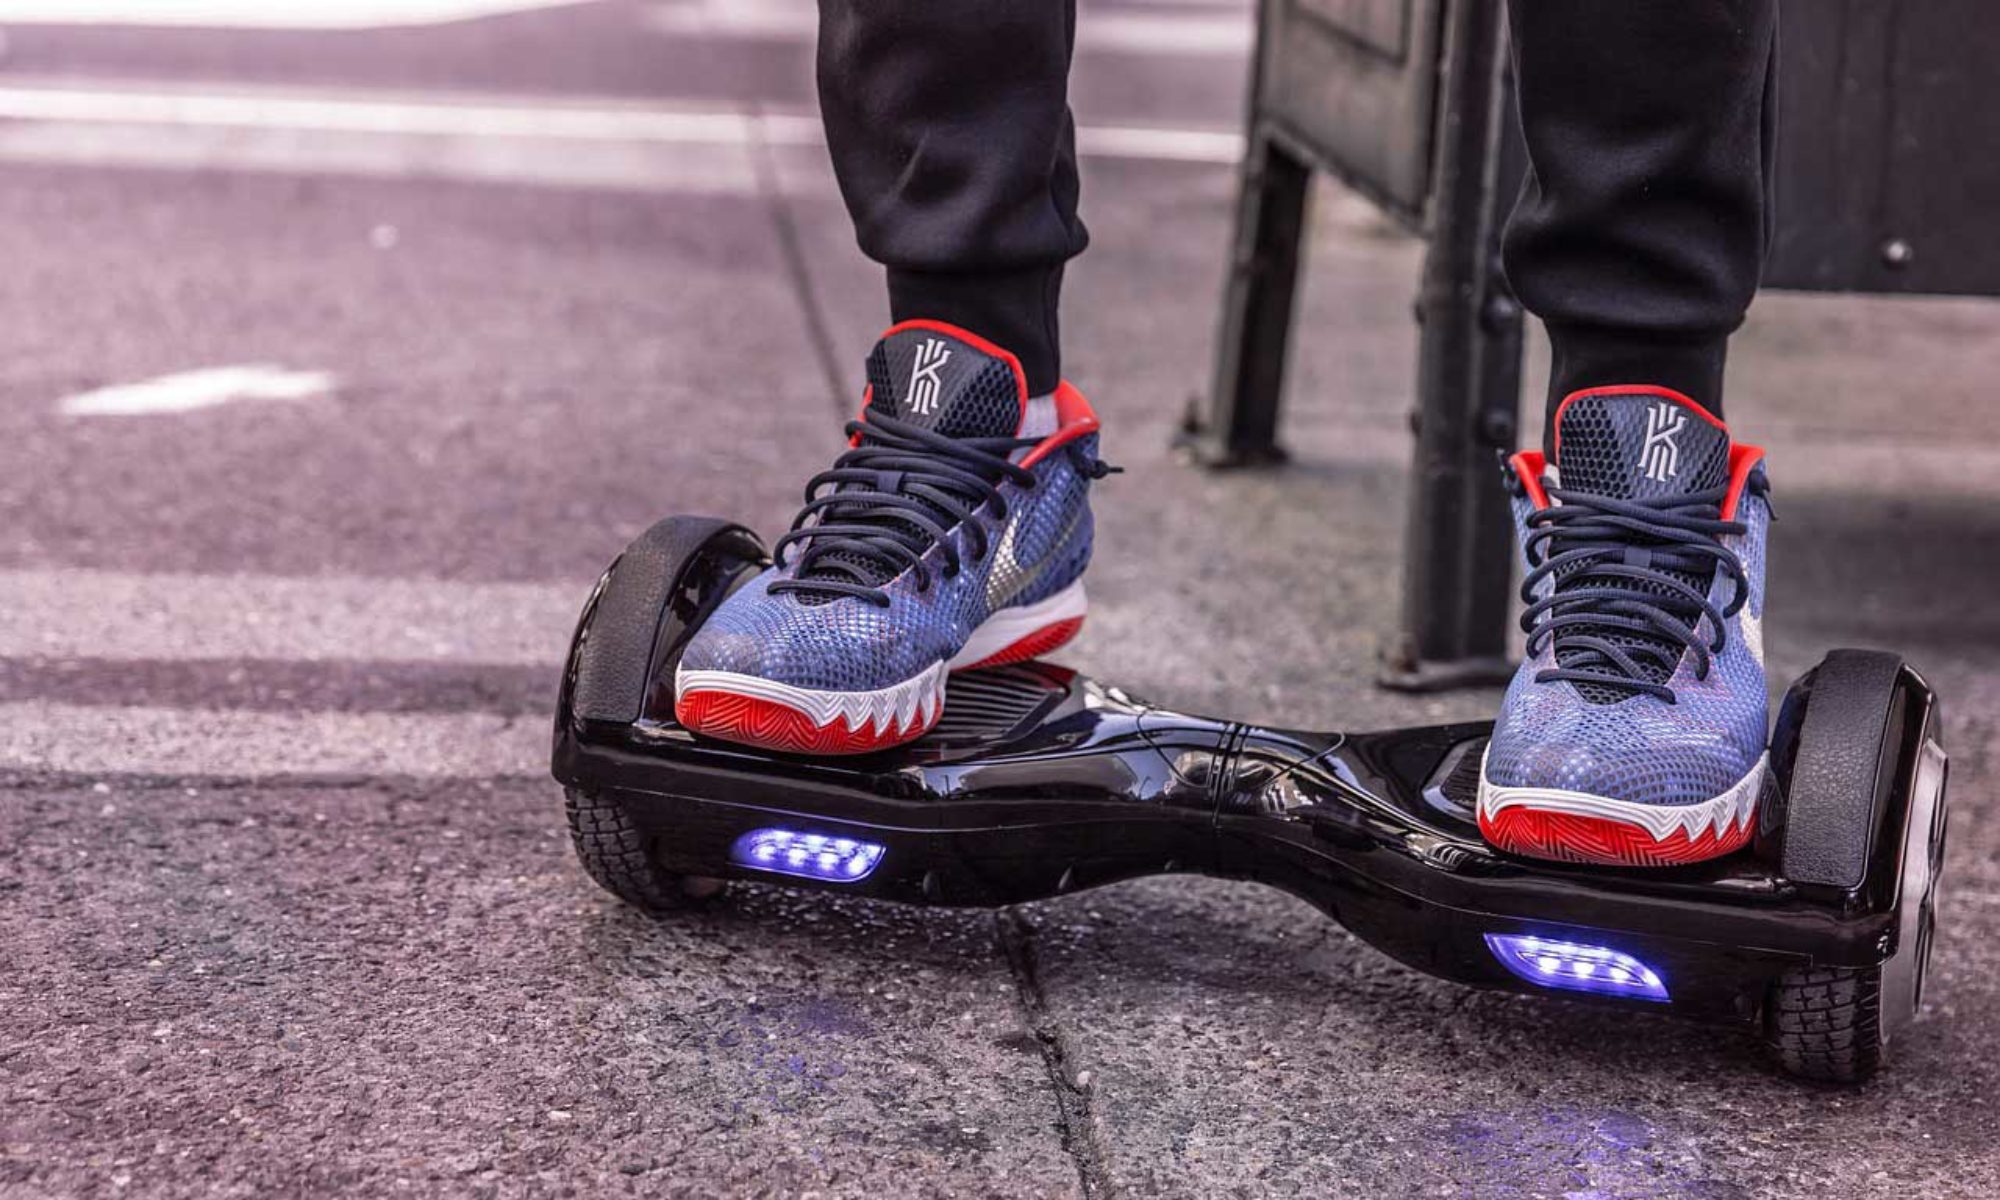 Hoverboard Reviews